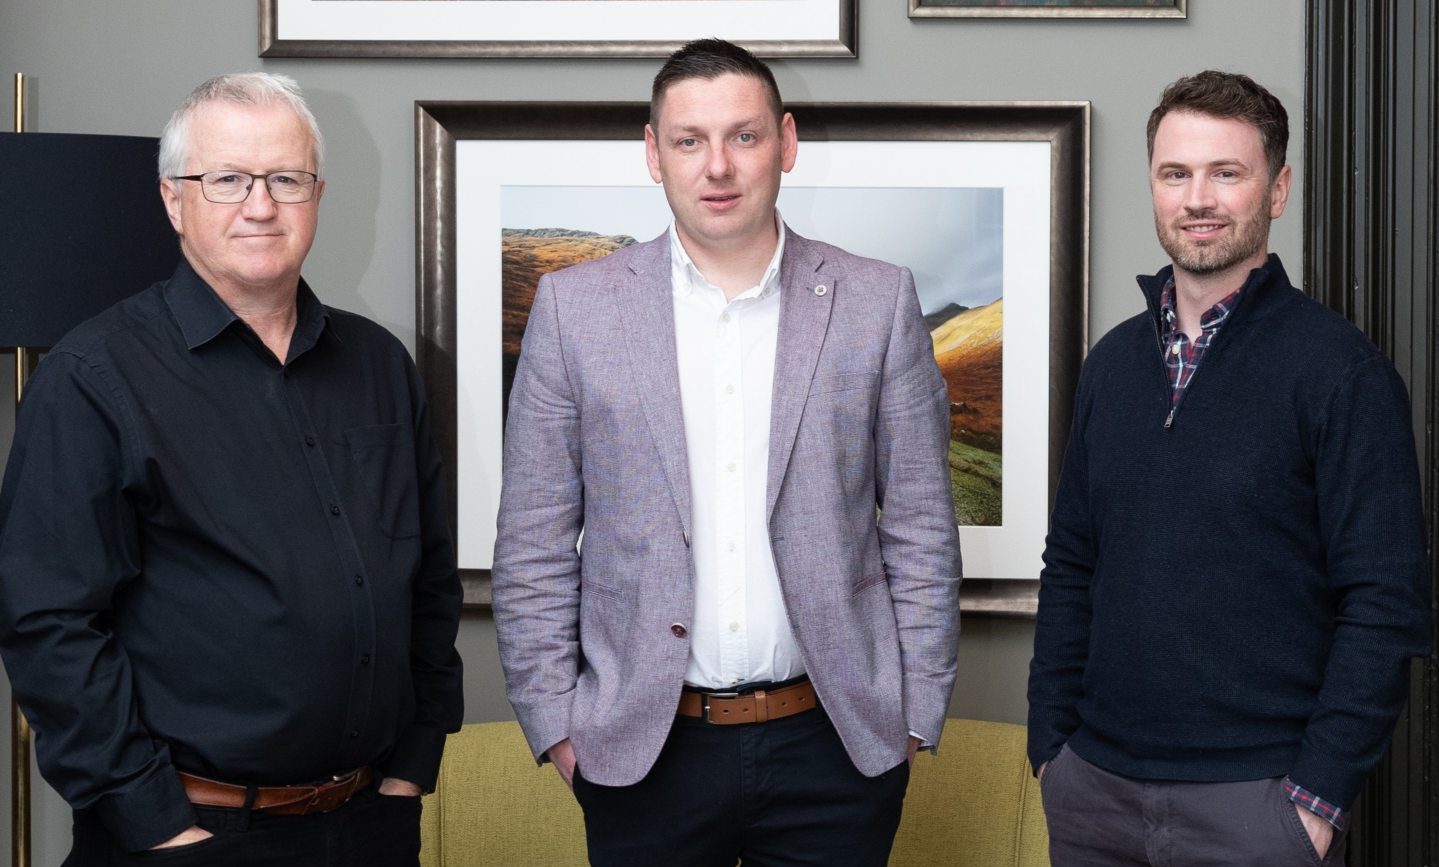 Gordon Linton, Managing Director of JTC, Connor McCloskey, CEO at Woodland NI and Chris Nixon, Investor at BGF in Belfast
Image: Chris Scott Photography